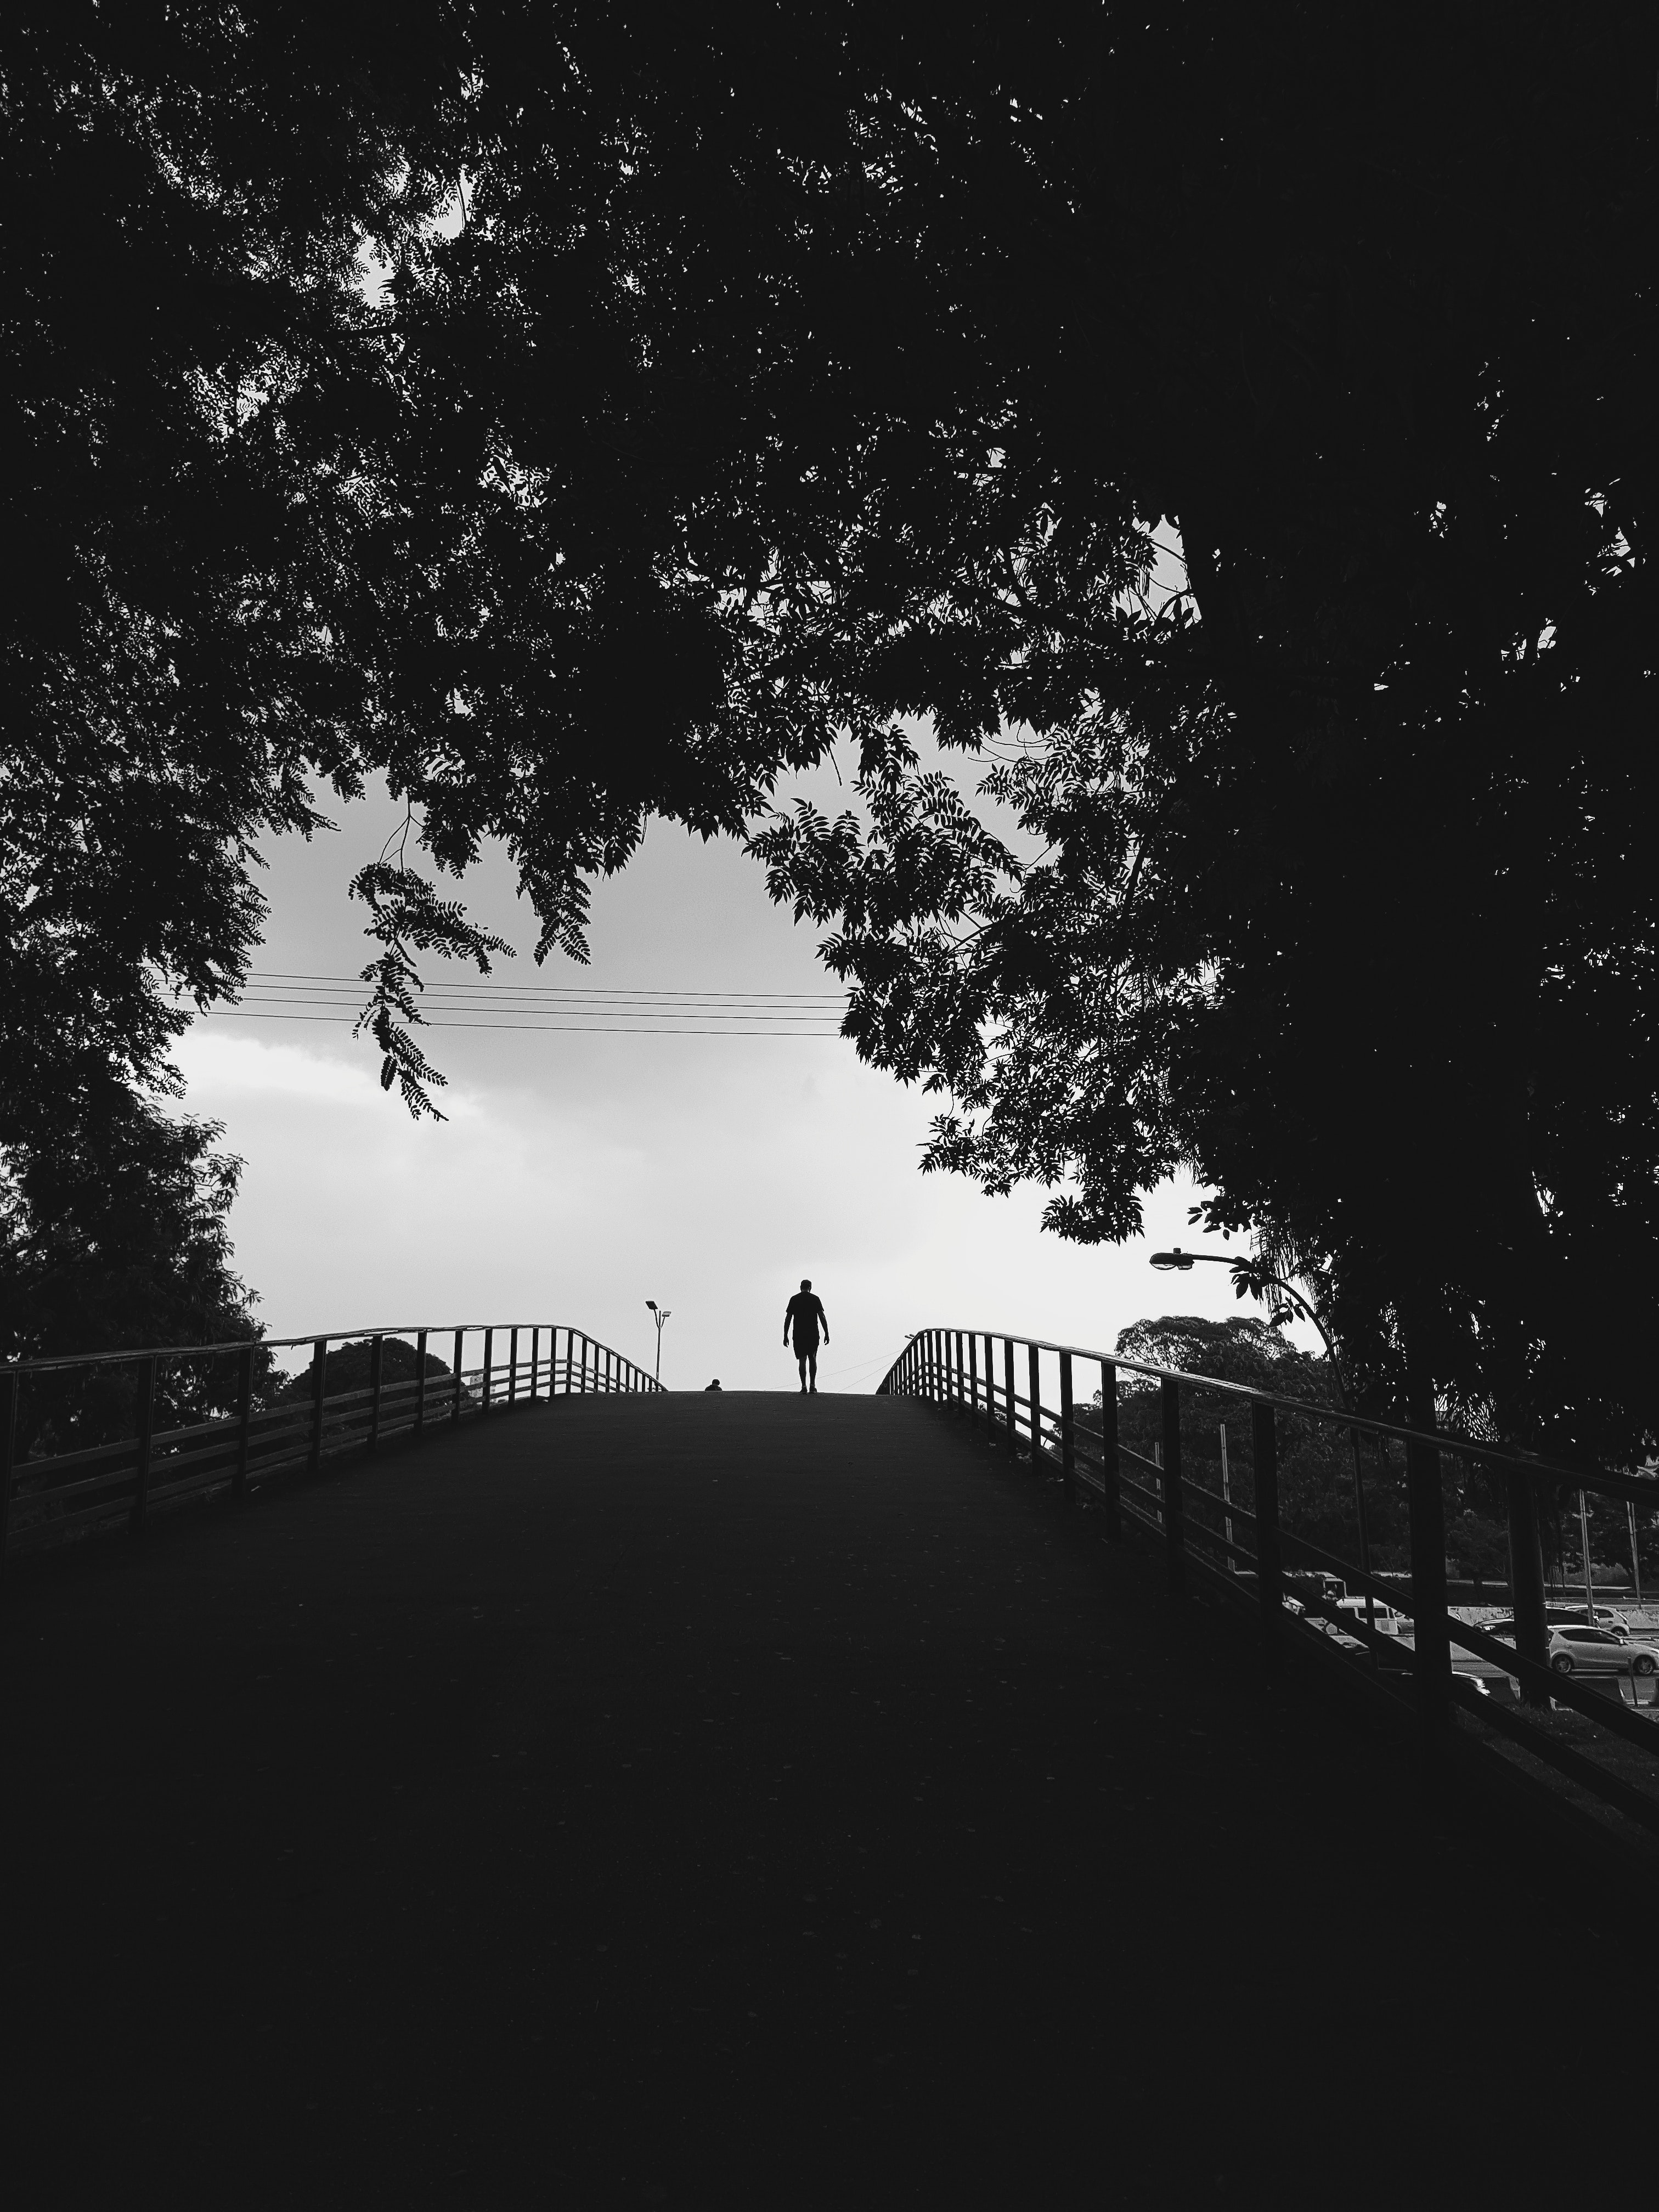 alone, trees, black, silhouette, stroll, bw, chb, loneliness, lonely